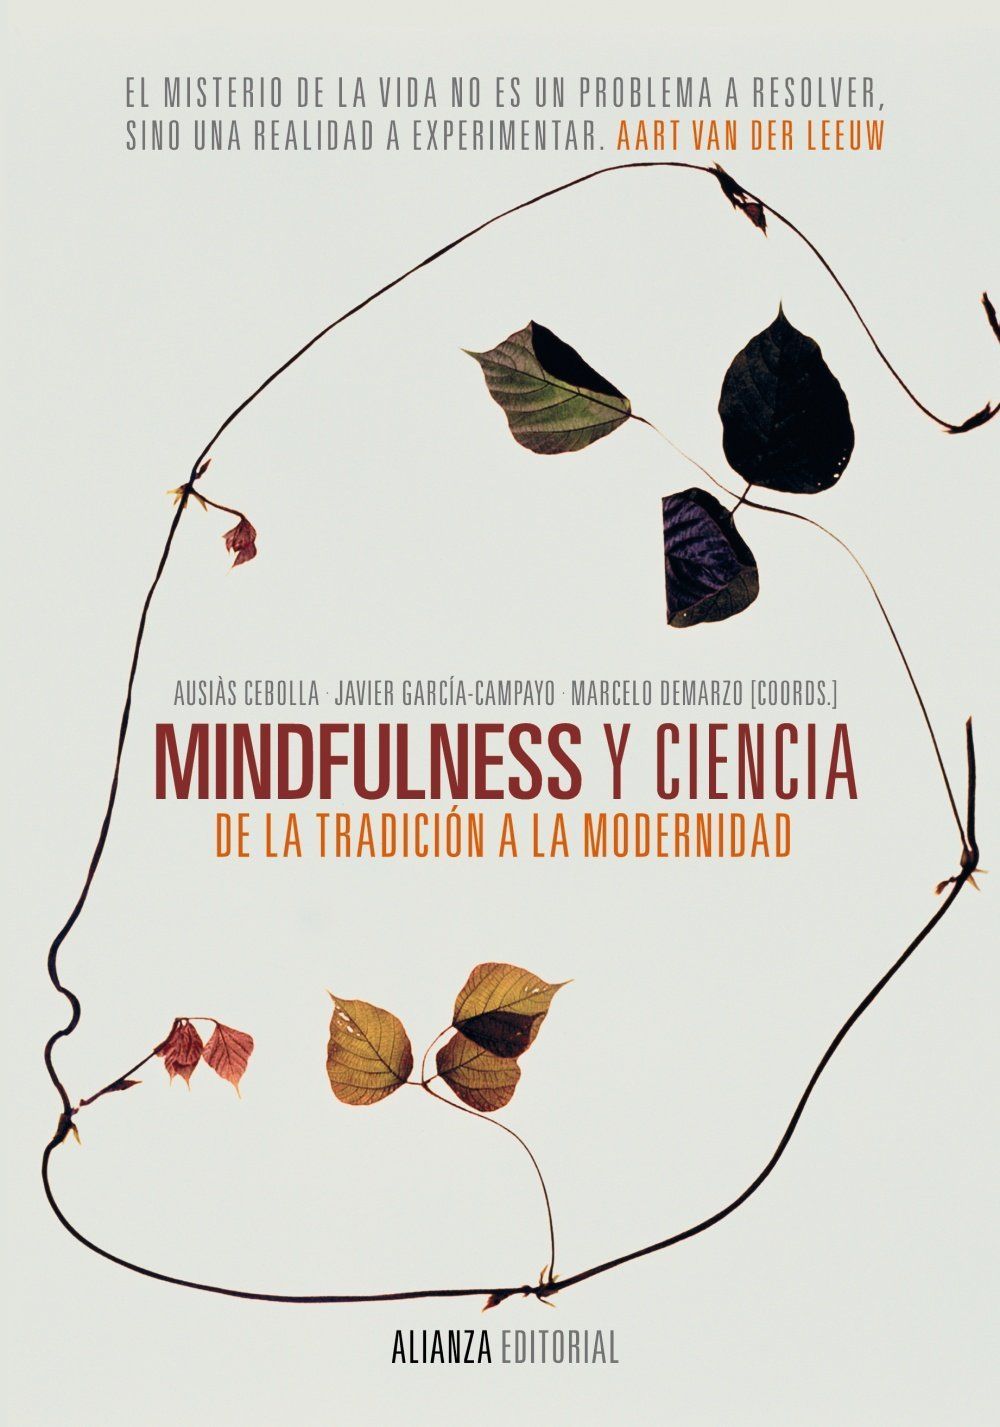 a book titled mindfulness y ciencia has leaves on the cover